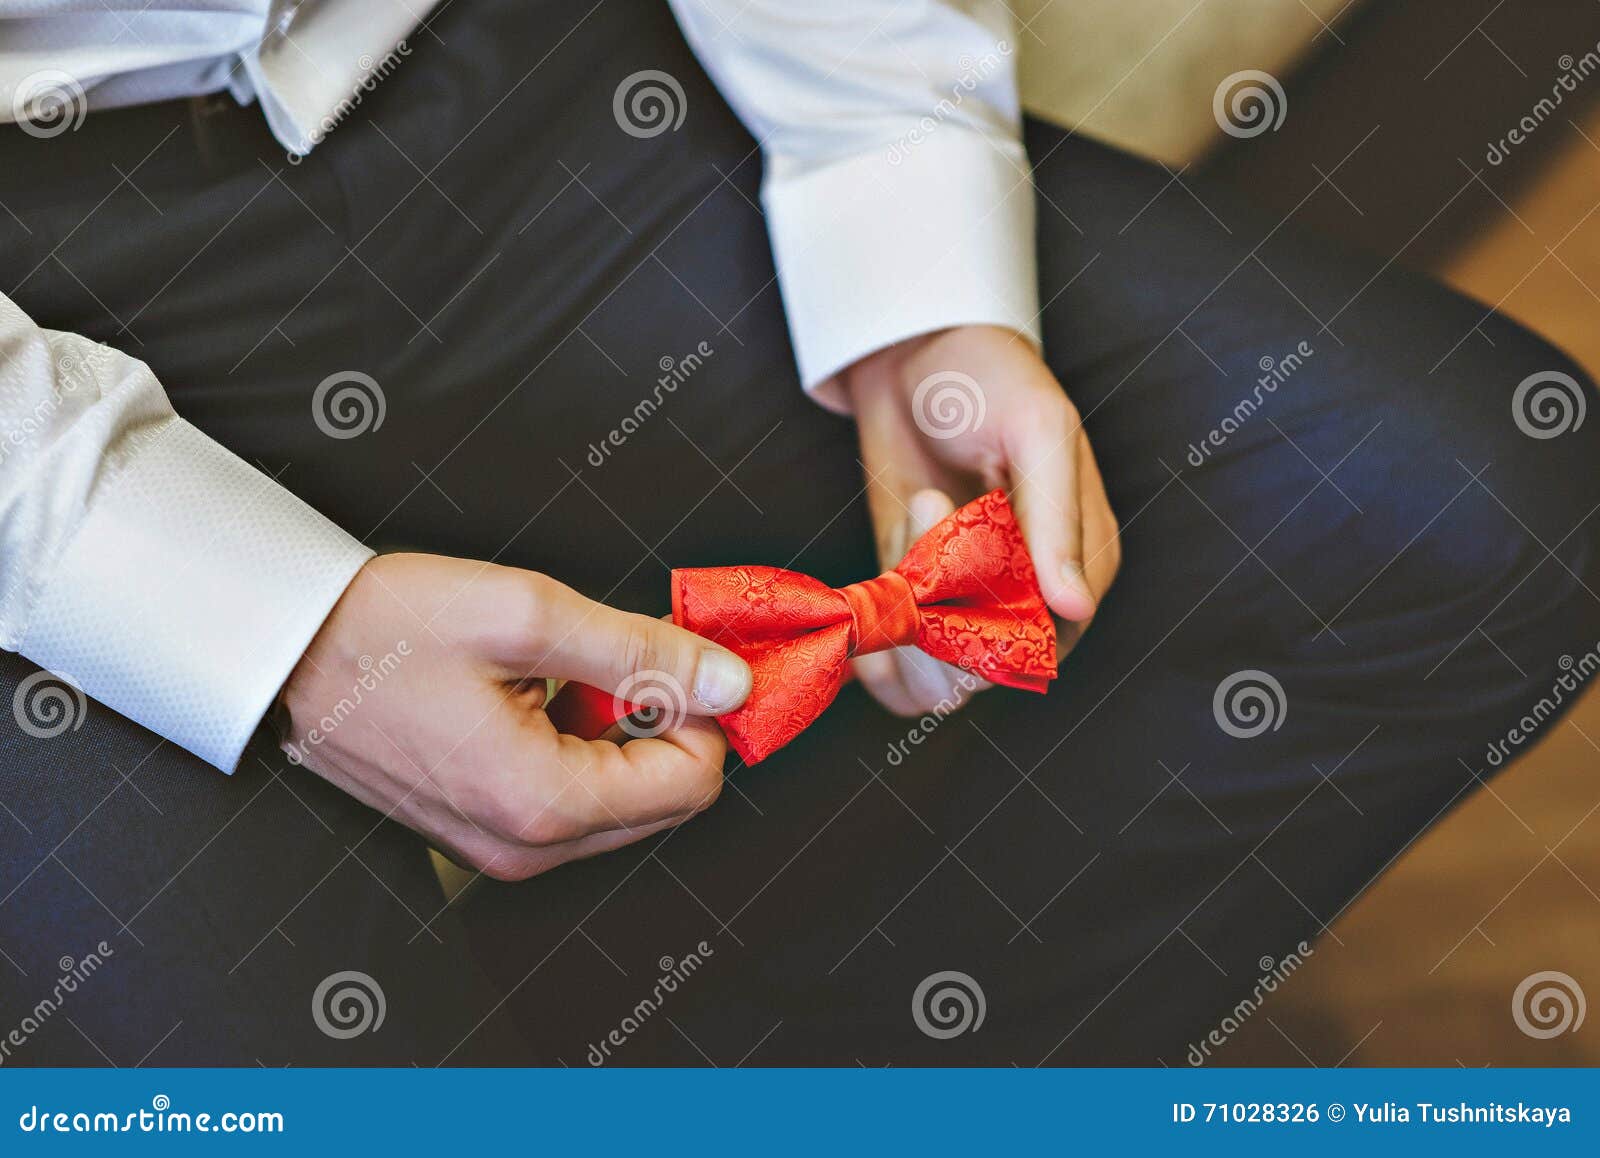 Photo of a Blue Suit with White Shirt and Red Tie Stock Photo - Image